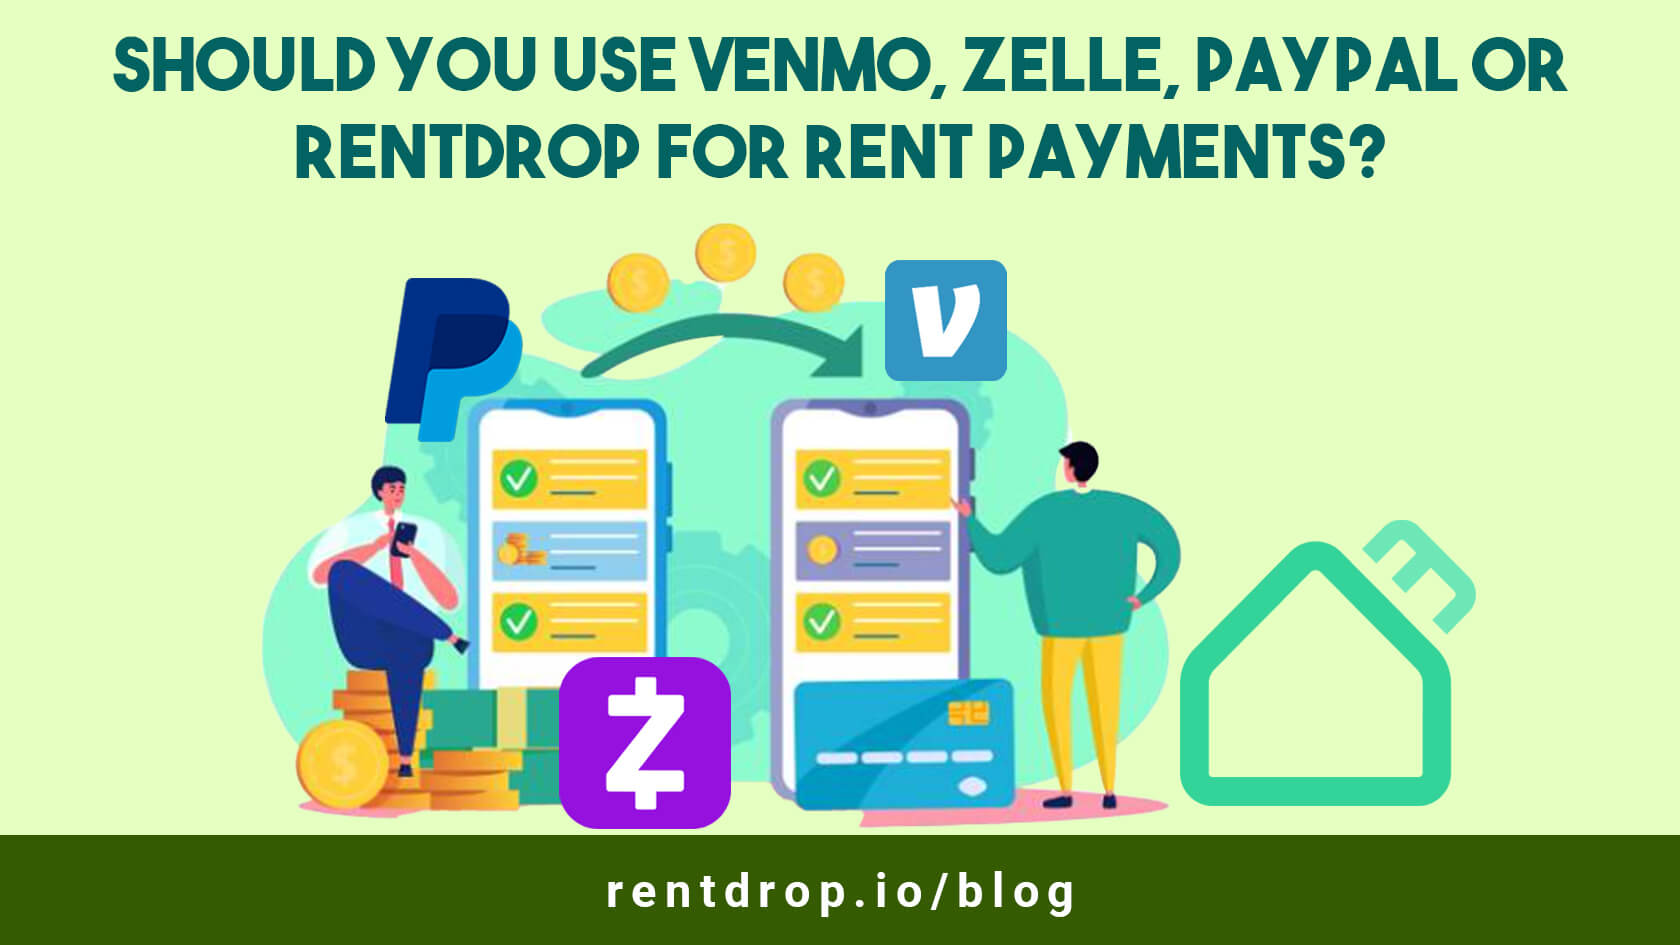 vemmo zelle paypal paypal rentdrop rent payments